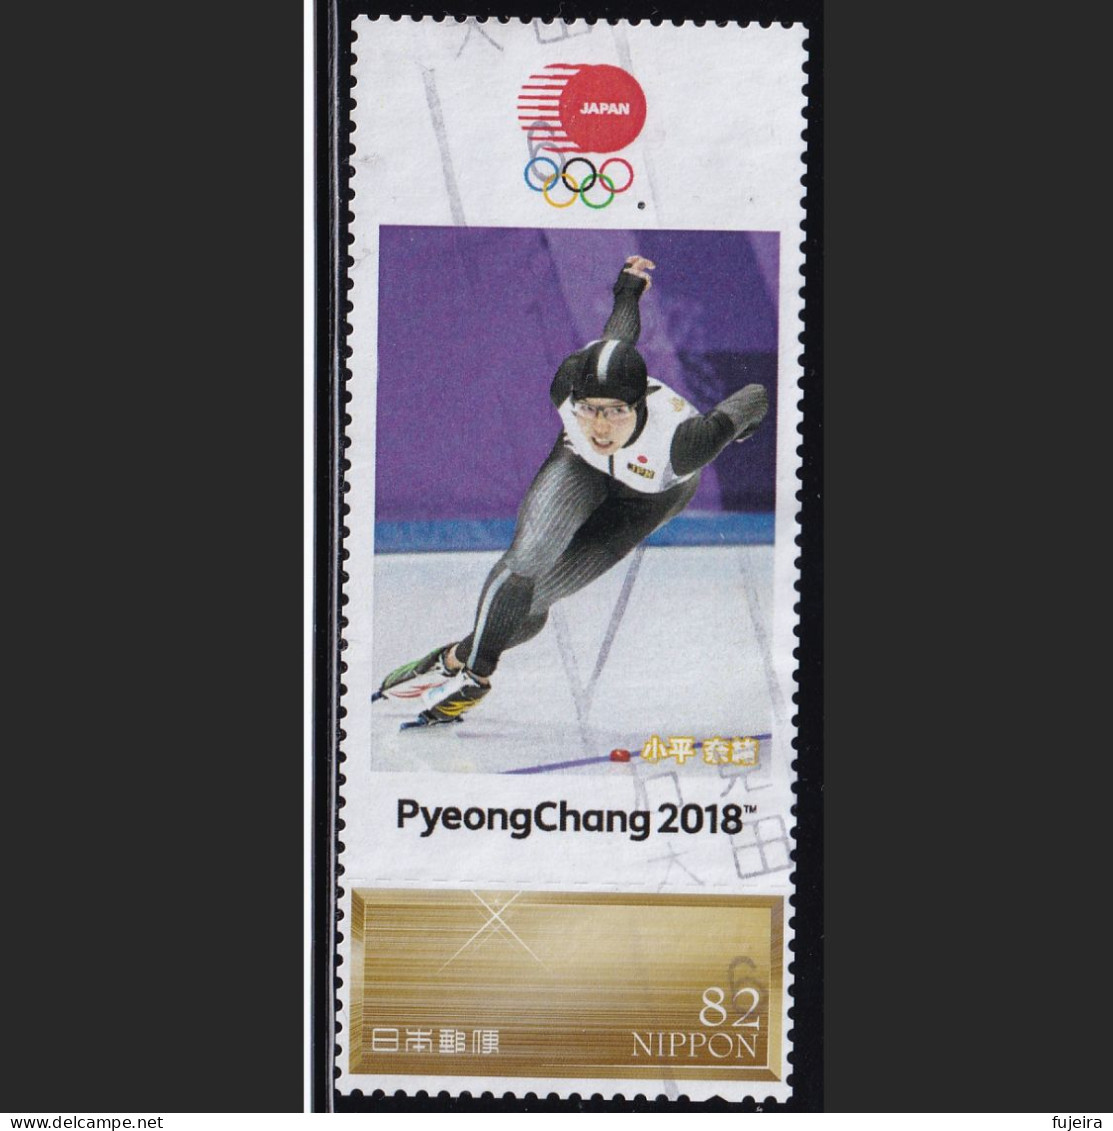 Japan Personalized Stamp, Olympic Games PyeongChang 2018 Skate Kodaira Nao (jpv9996) Used - Oblitérés